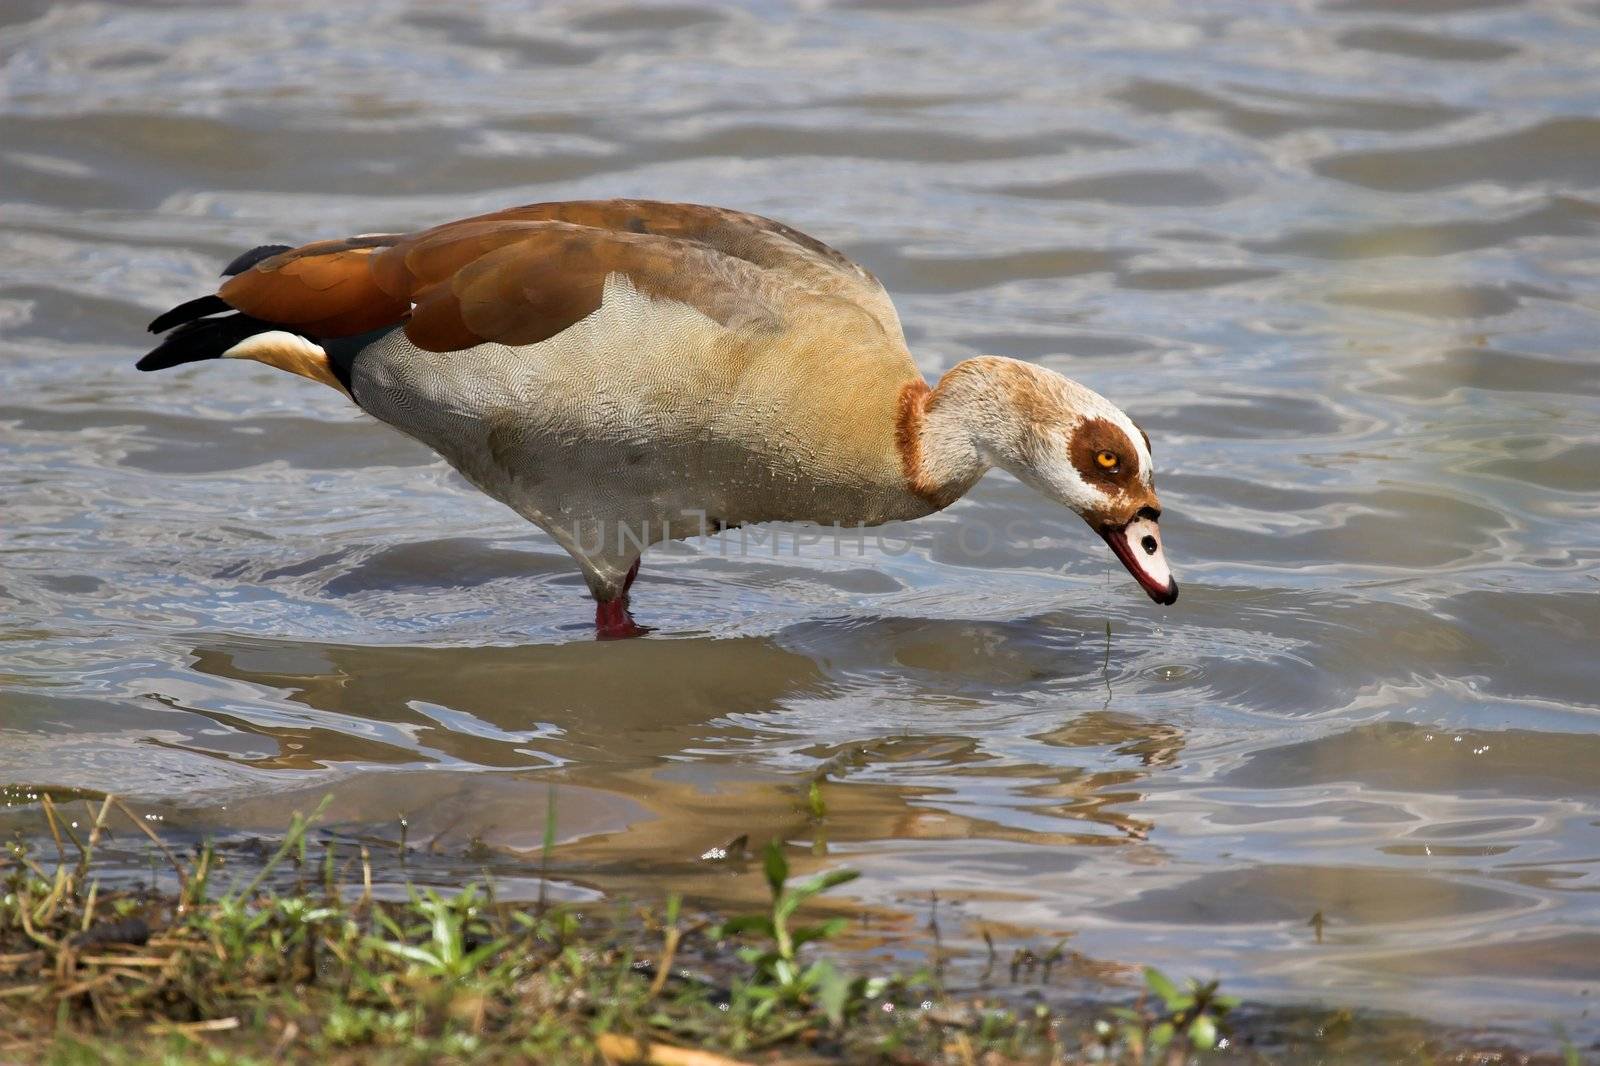 Egyptian goose feeding in the shallow water